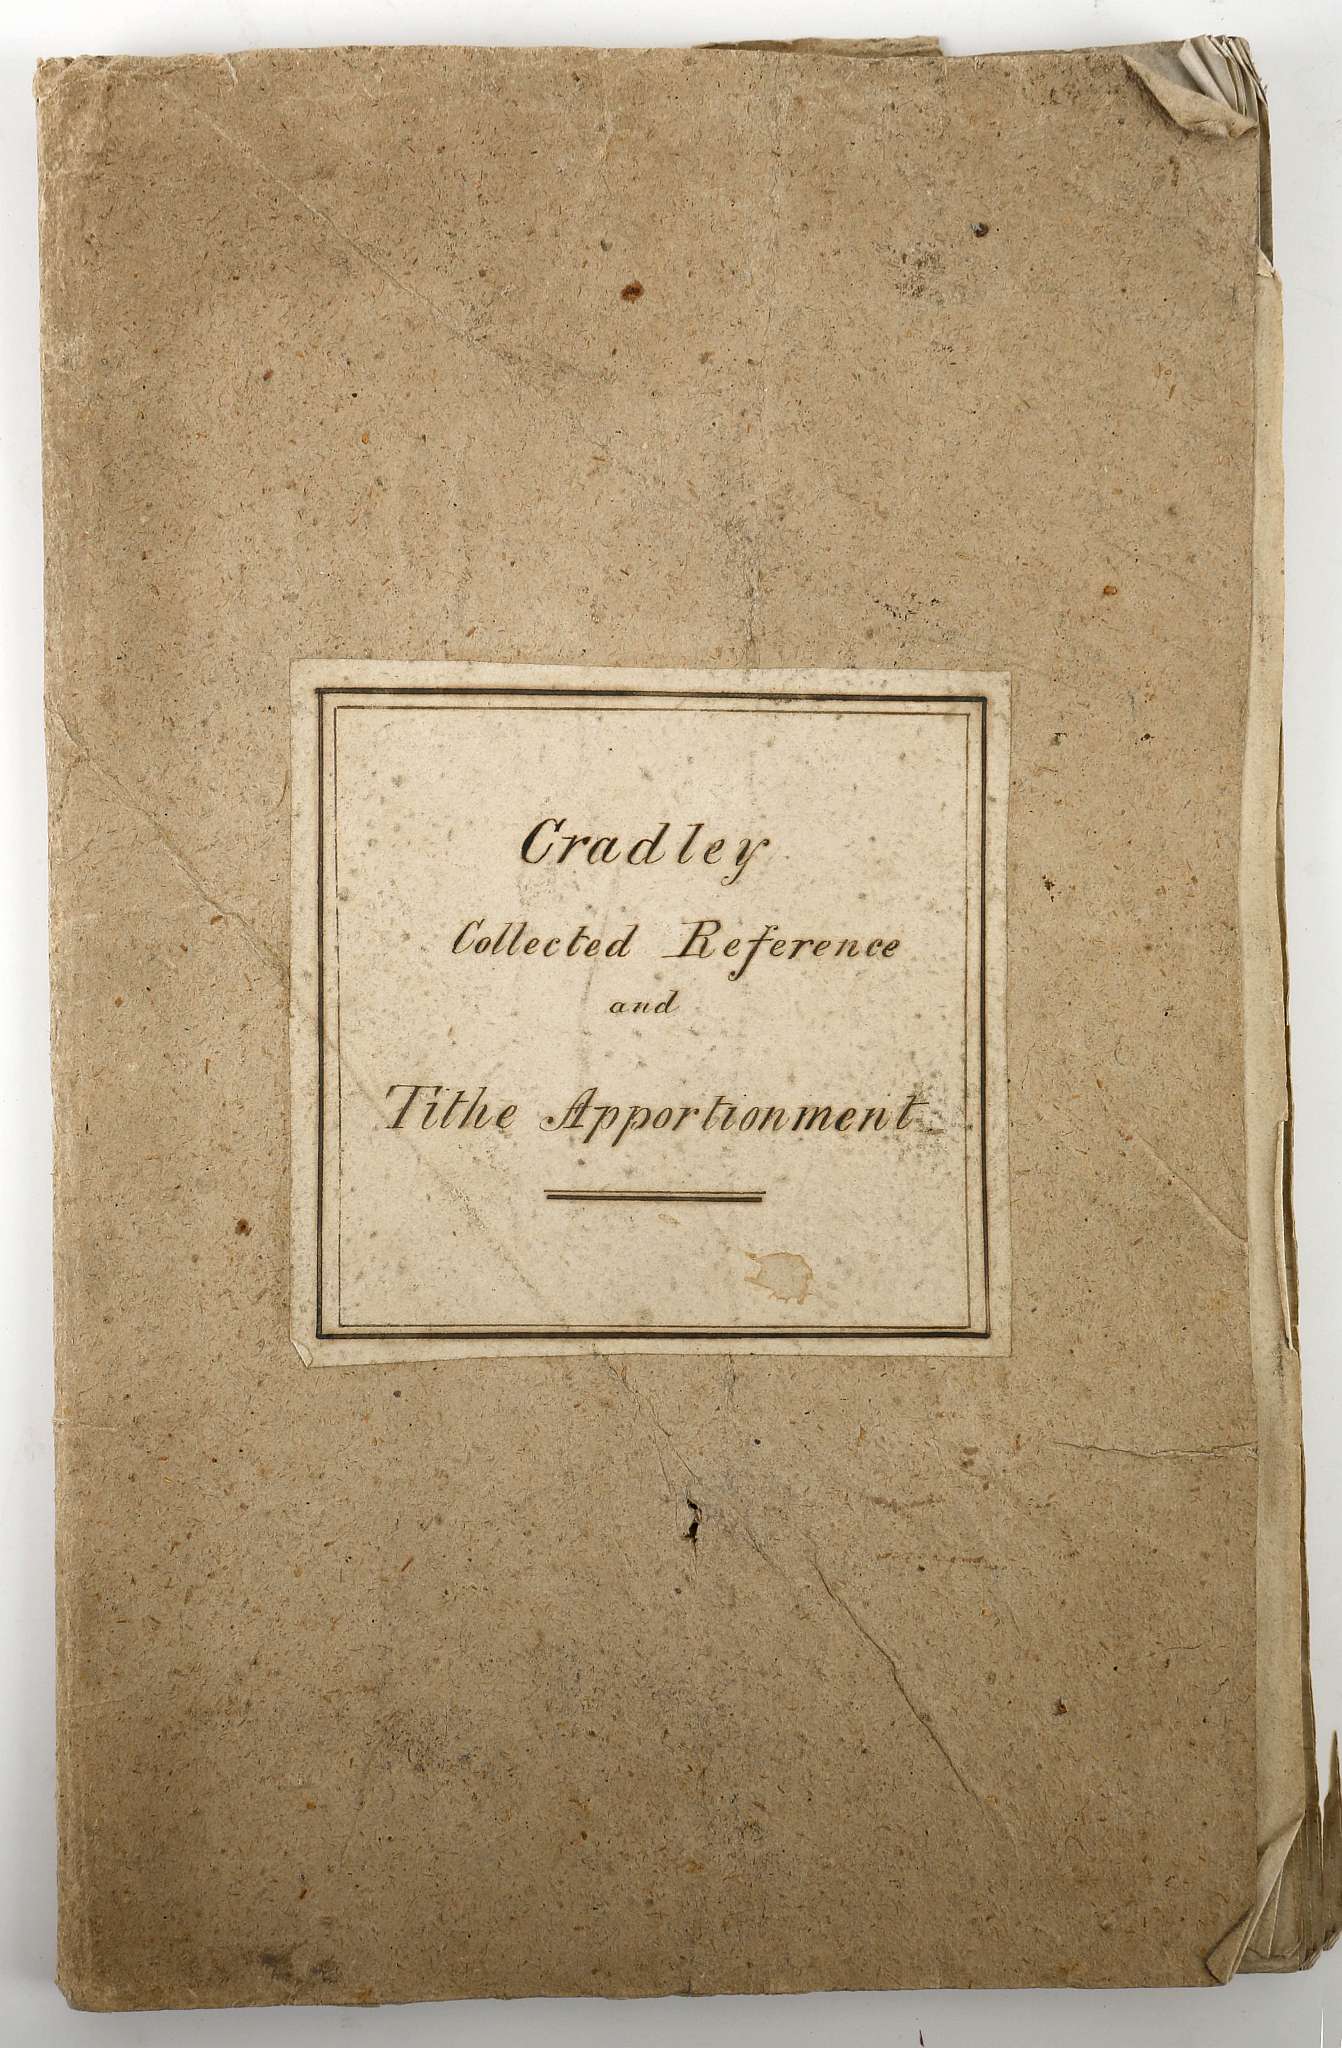 WEST MIDLANDS/WORCESTERSHIRE – CRADLEY the original title apportionment book for Cradley dated 1844,